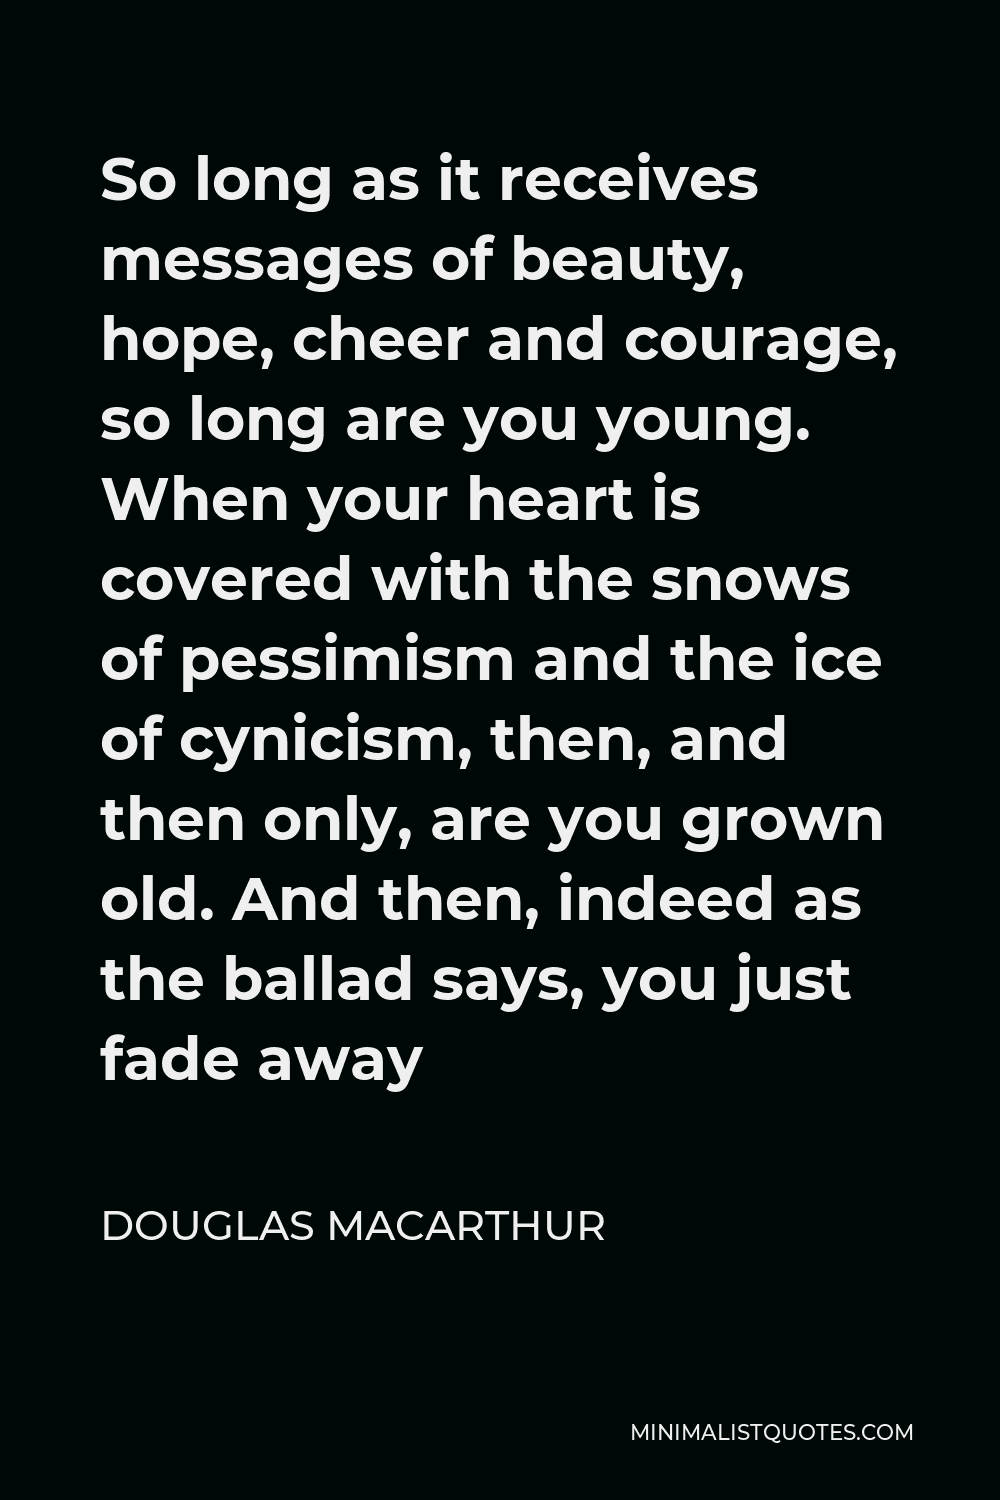 Douglas MacArthur Quote - So long as it receives messages of beauty, hope, cheer and courage, so long are you young. When your heart is covered with the snows of pessimism and the ice of cynicism, then, and then only, are you grown old. And then, indeed as the ballad says, you just fade away